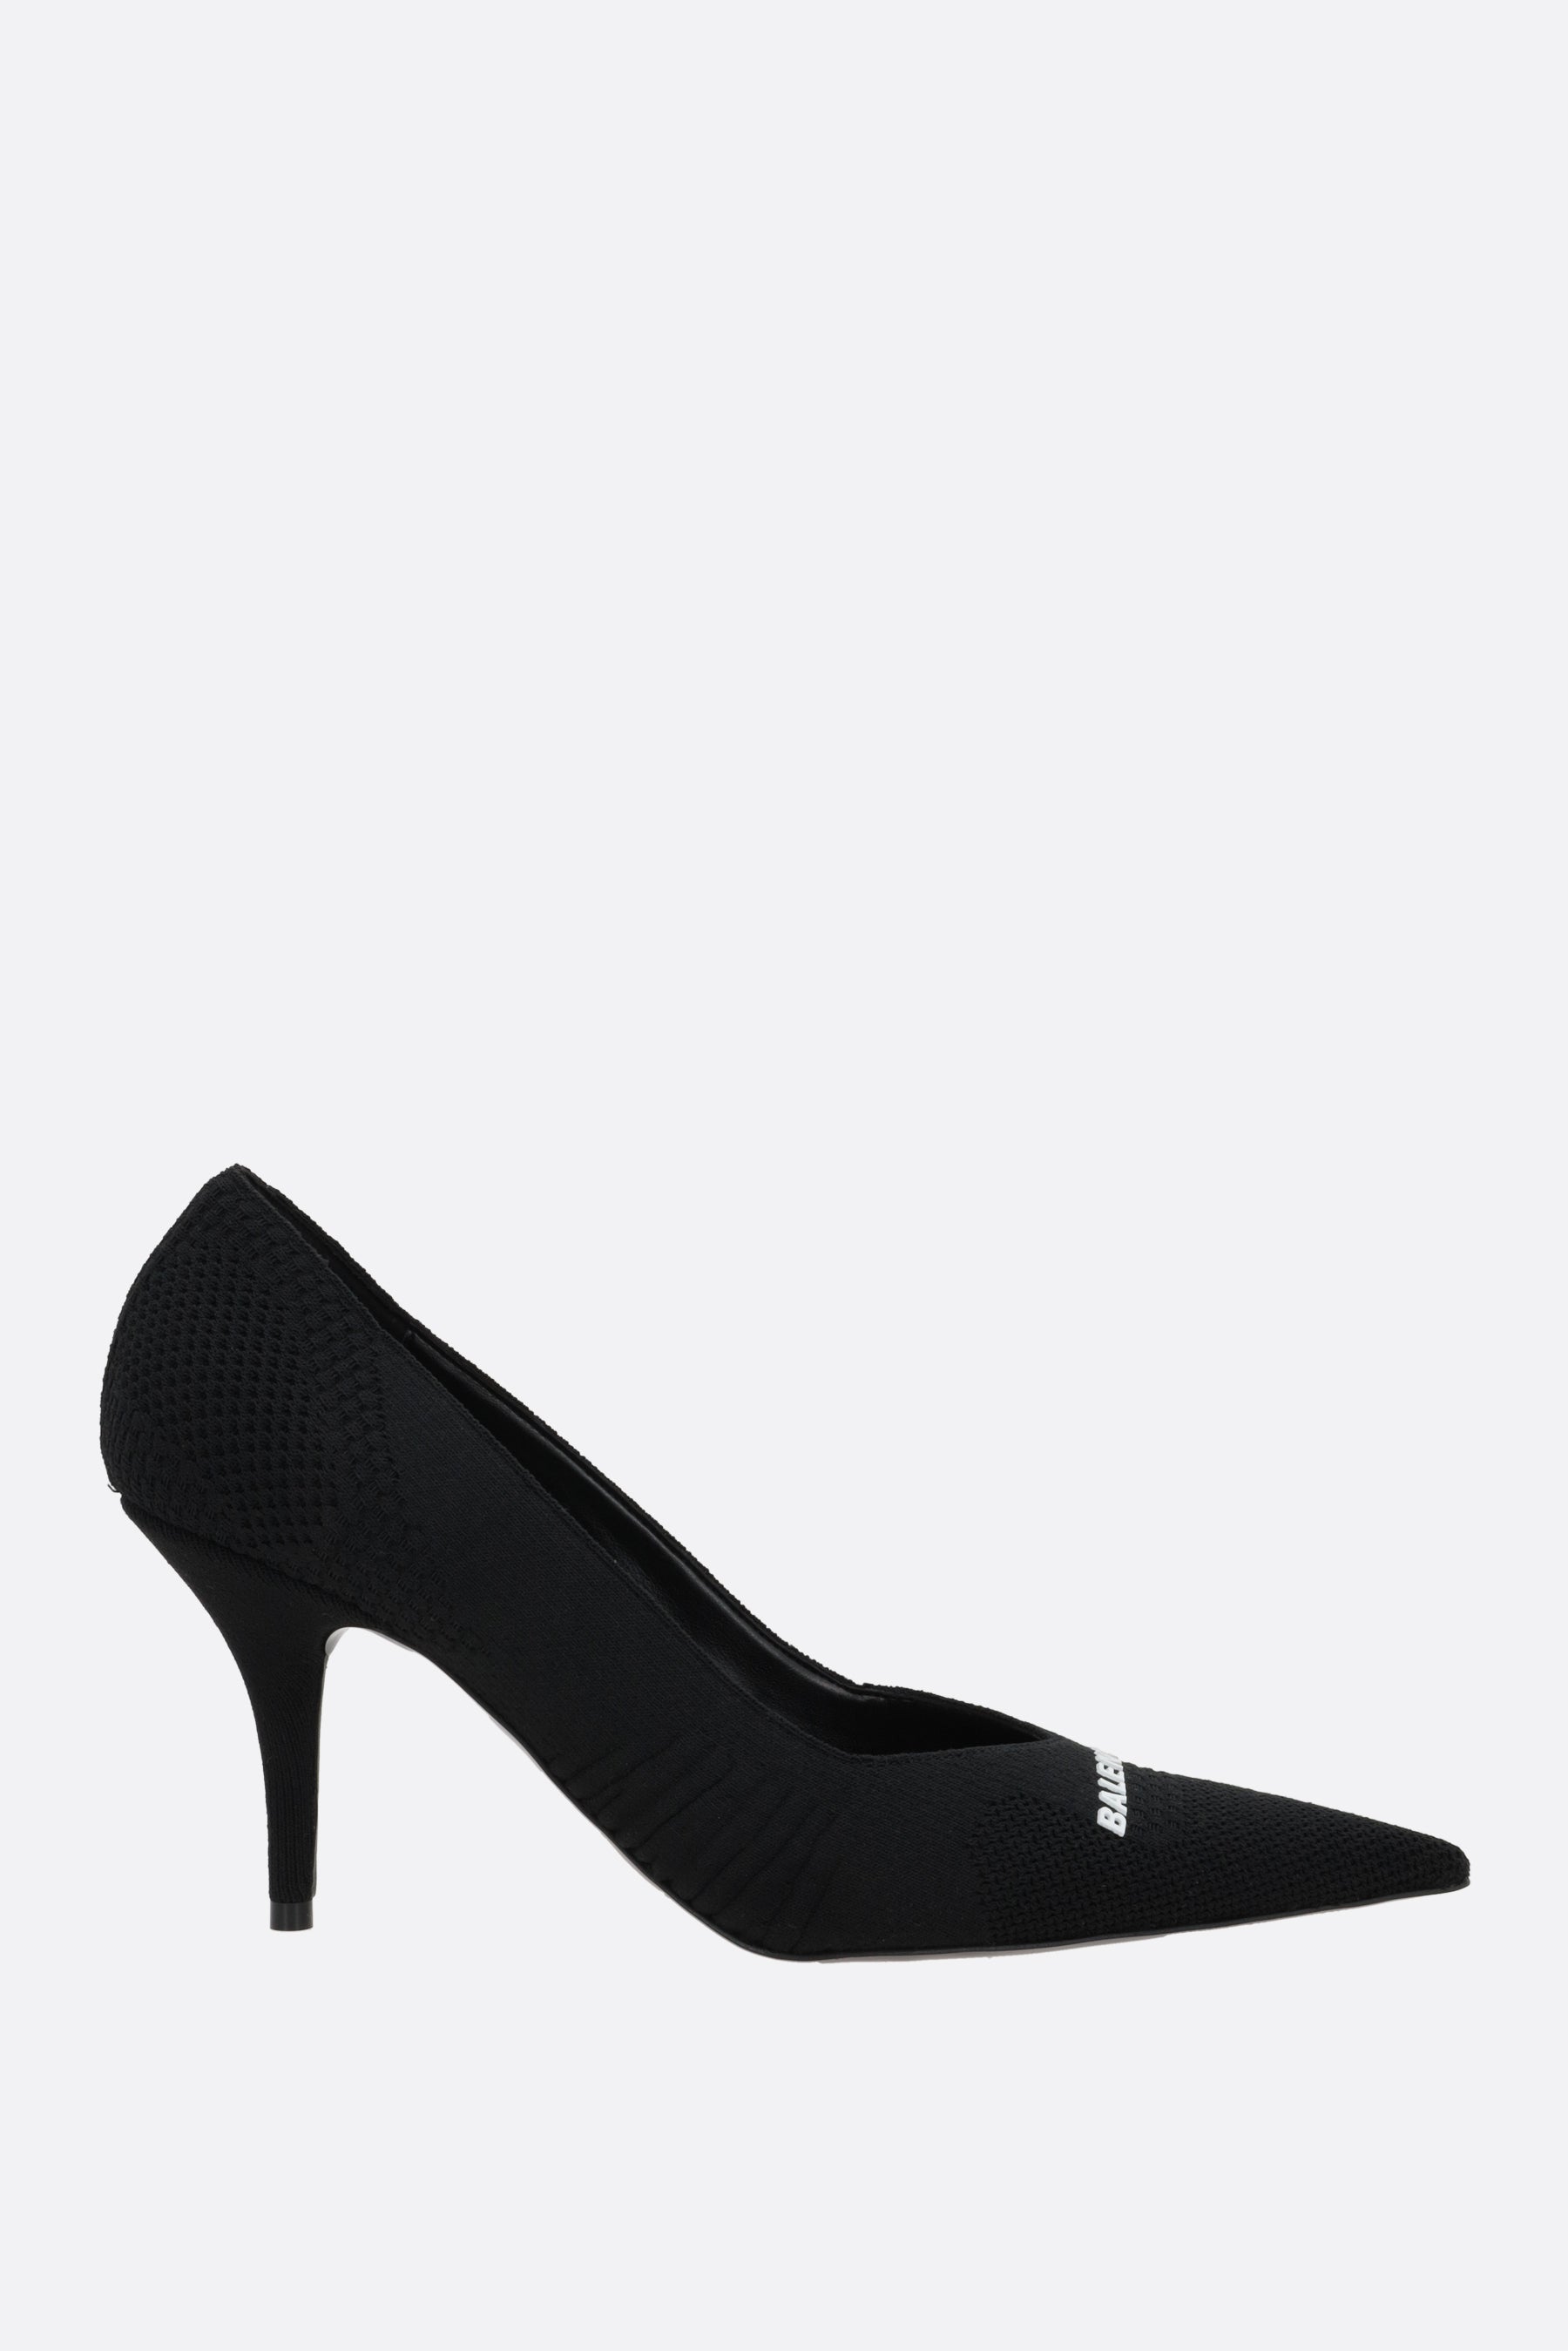 Knife recycled knit pumps – 10corsocomo